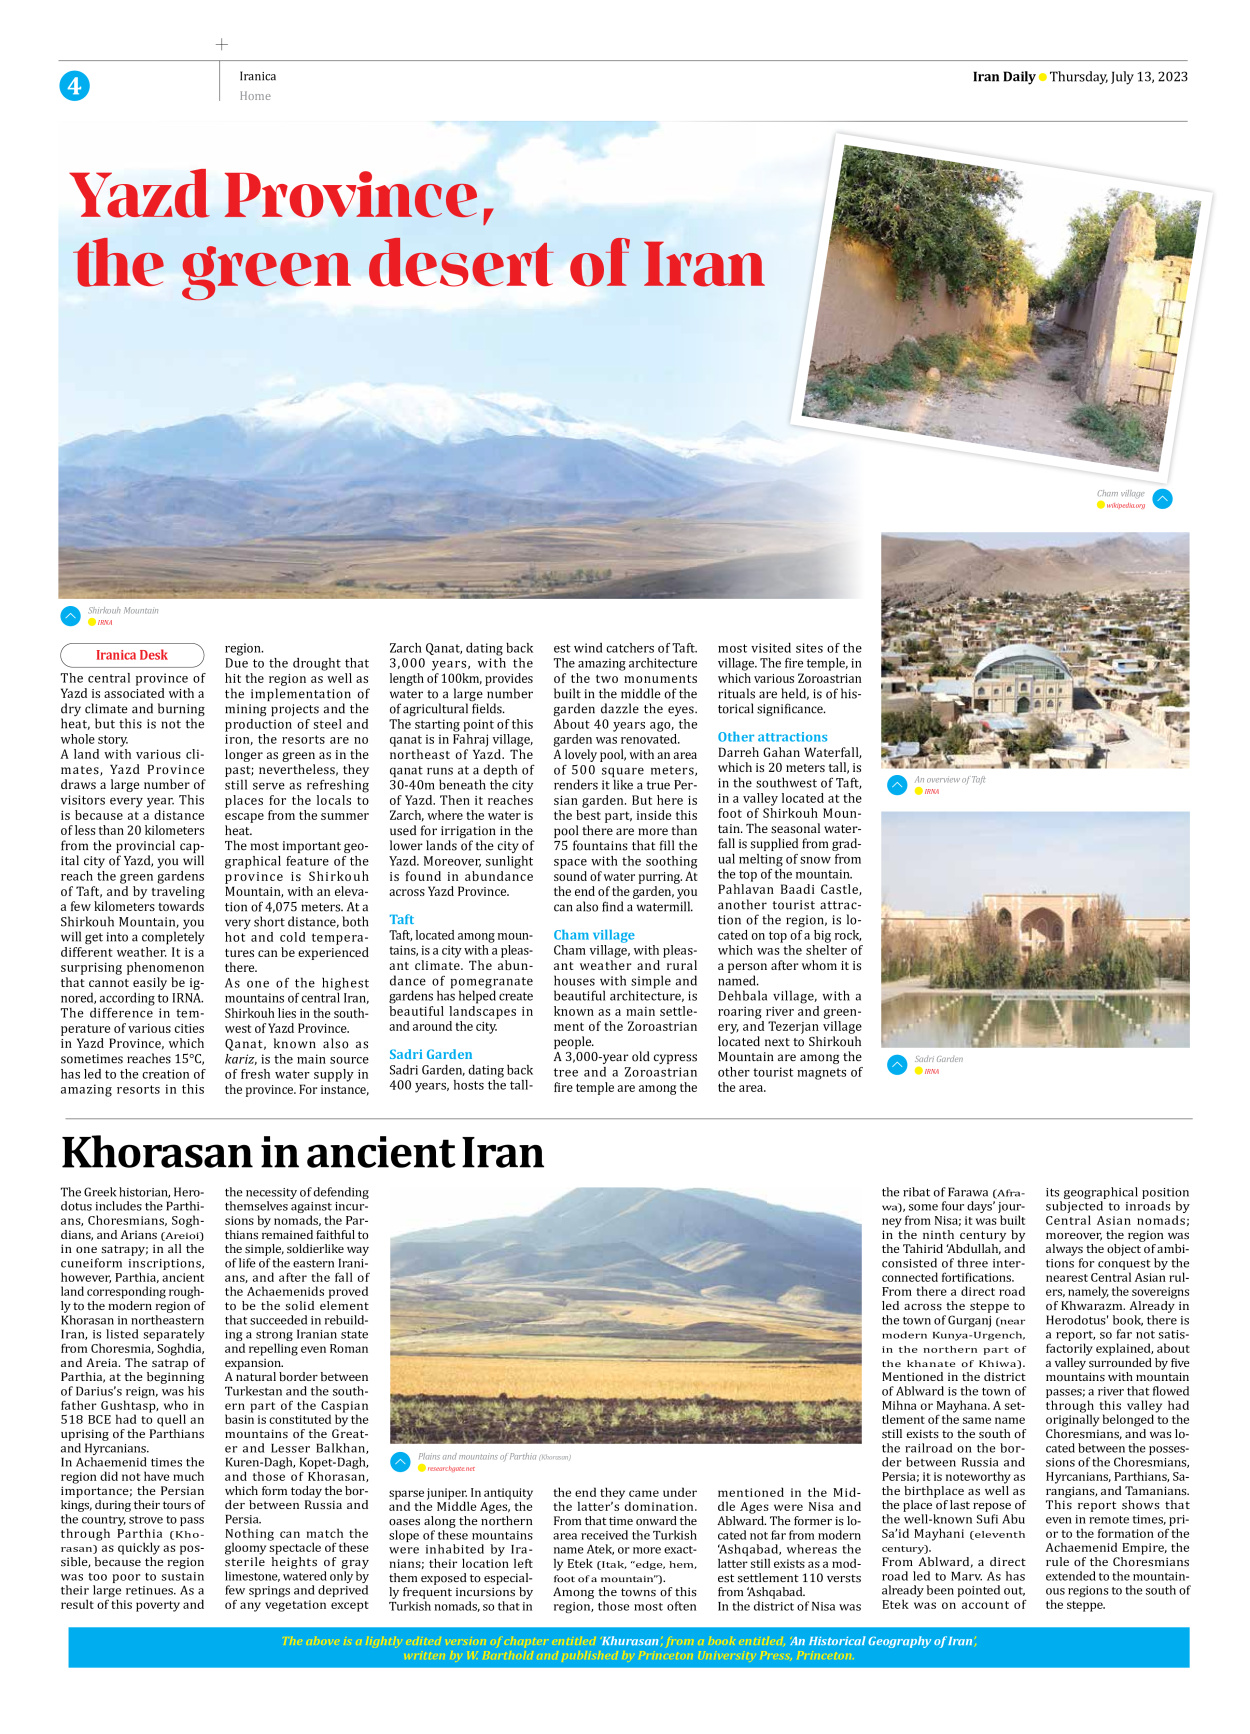 Iran Daily - Number Seven Thousand Three Hundred and Thirty Eight - 13 July 2023 - Page 4